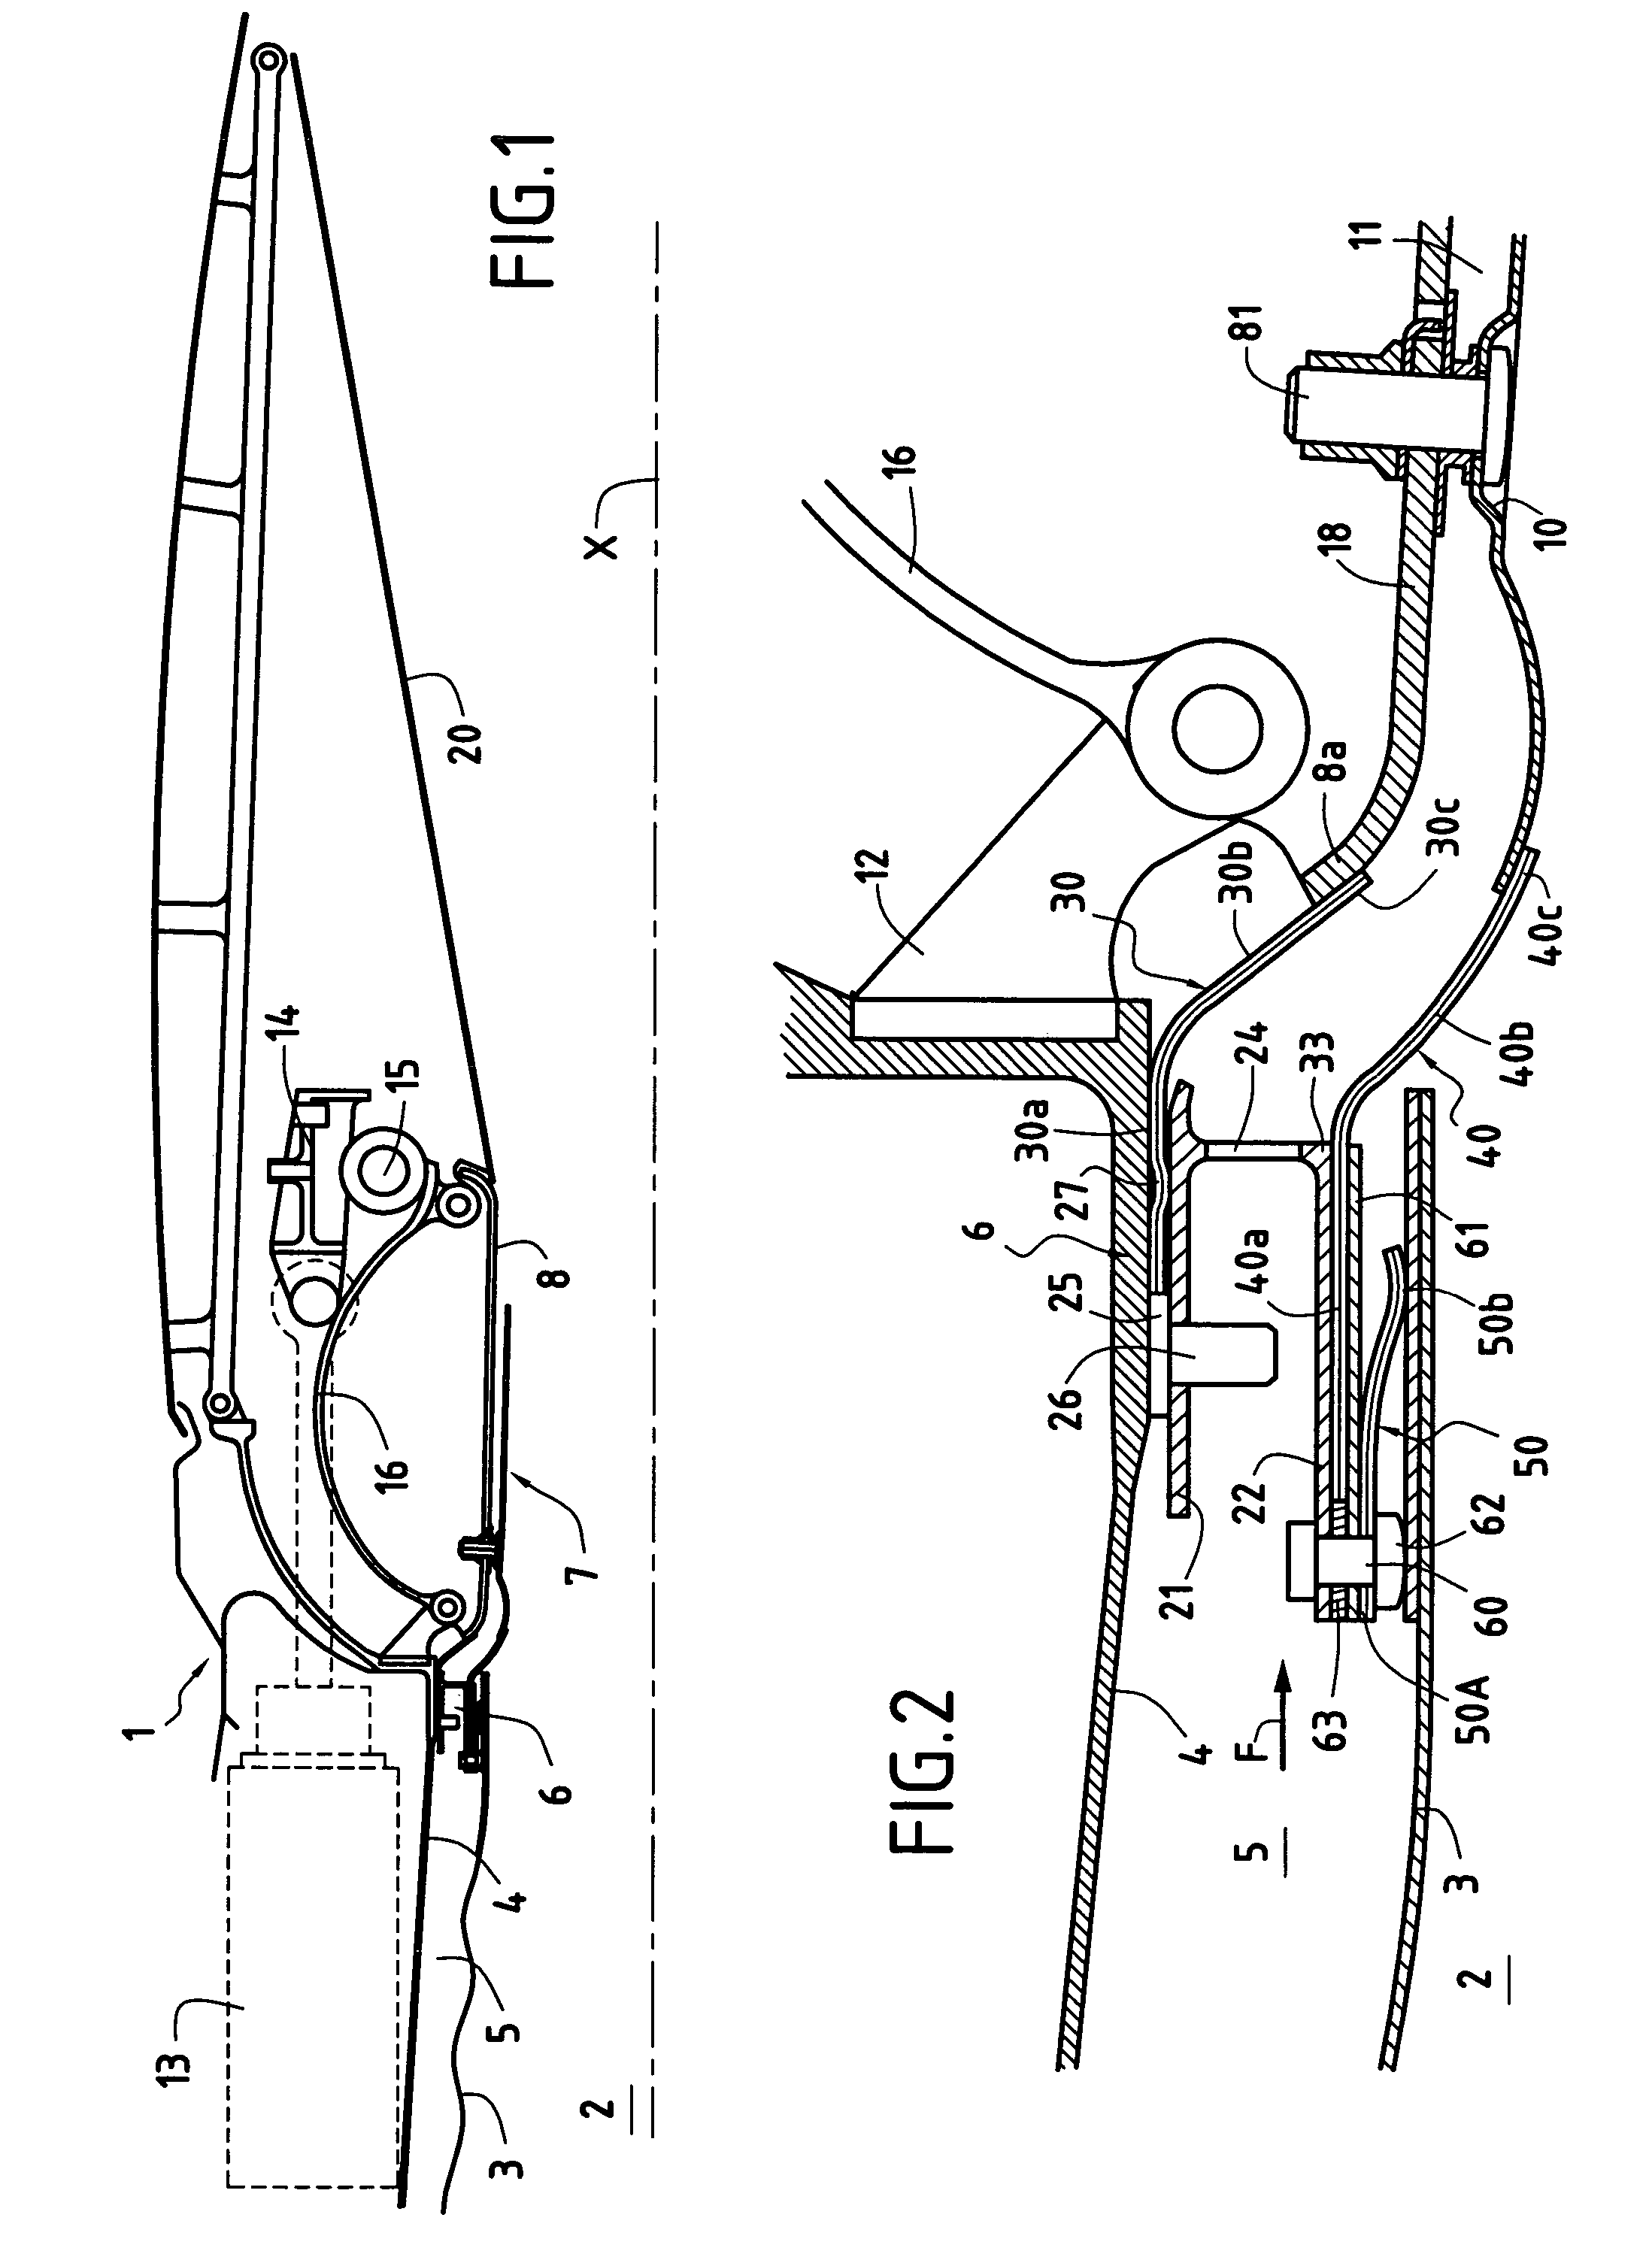 System for sealing the secondary flow at the inlet to a nozzle of a turbomachine having a post-combustion chamber